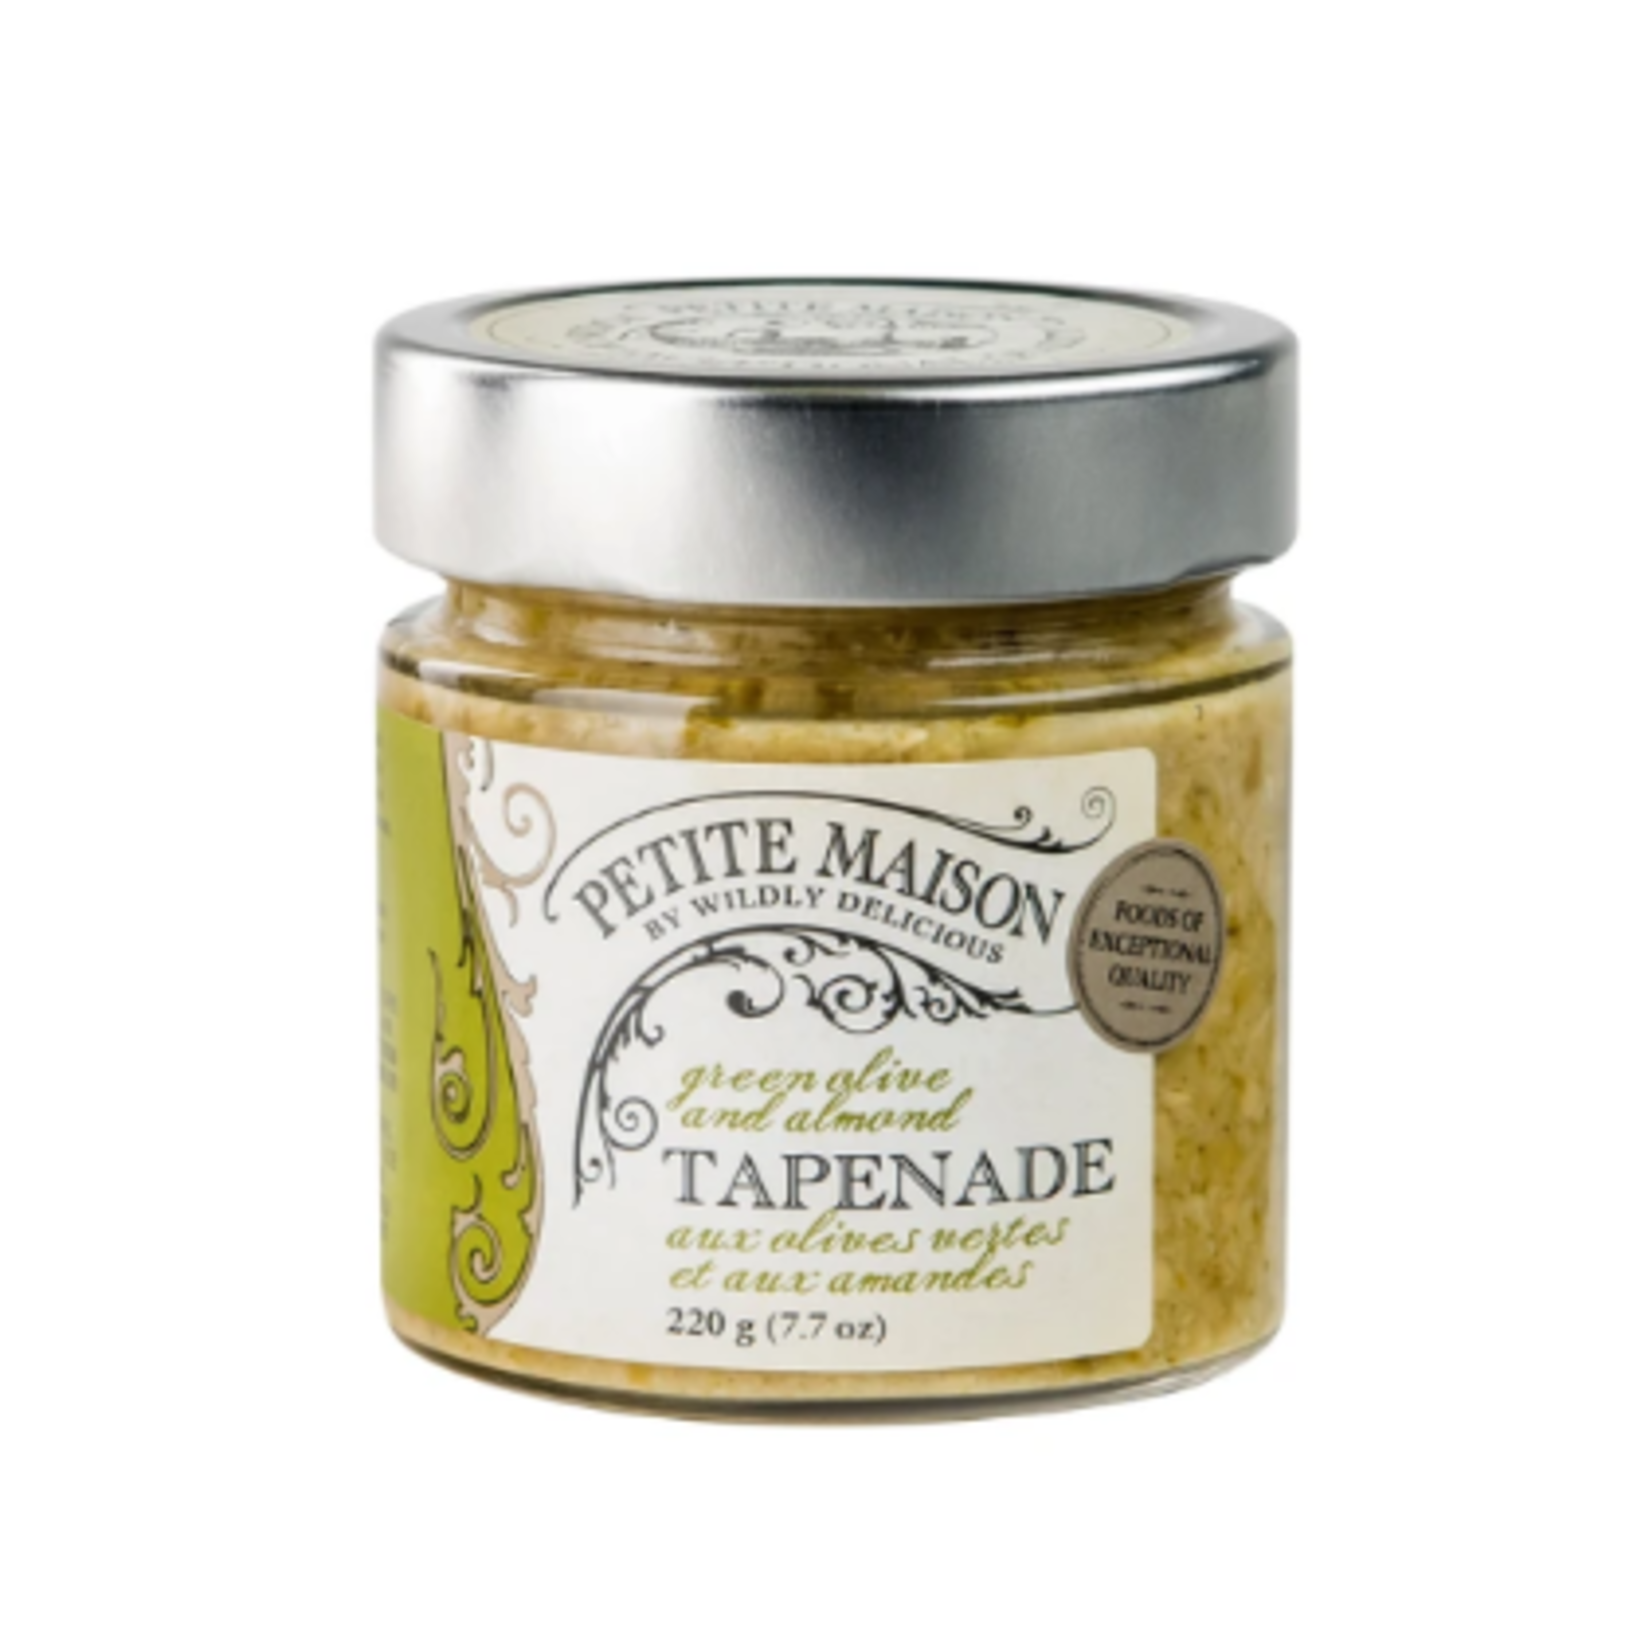 Wildly Delicious Green Olive & Almond Tapenade